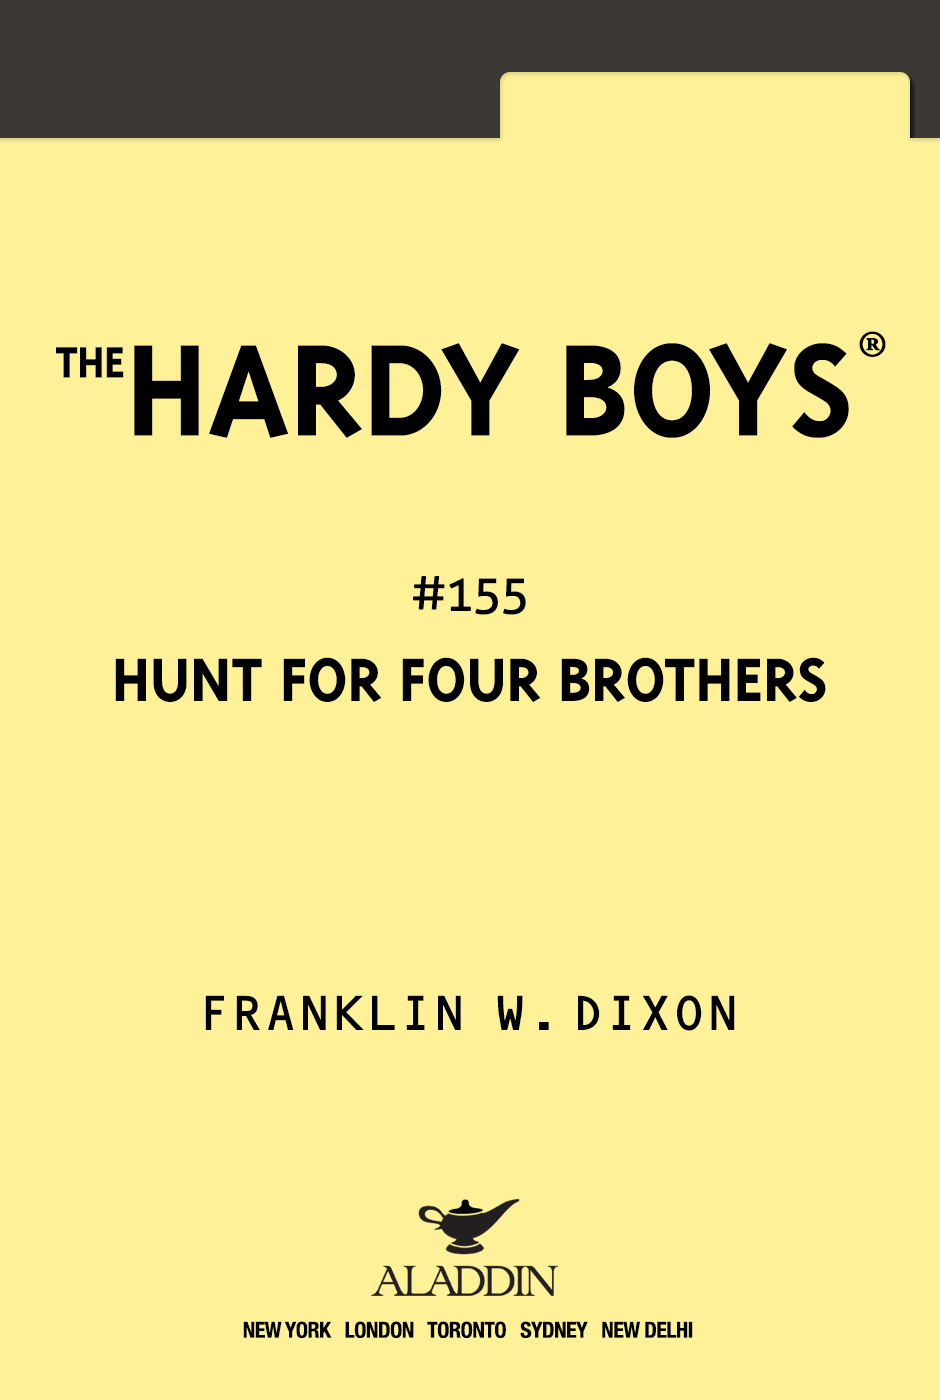 The Hunt for Four Brothers by Franklin W. Dixon